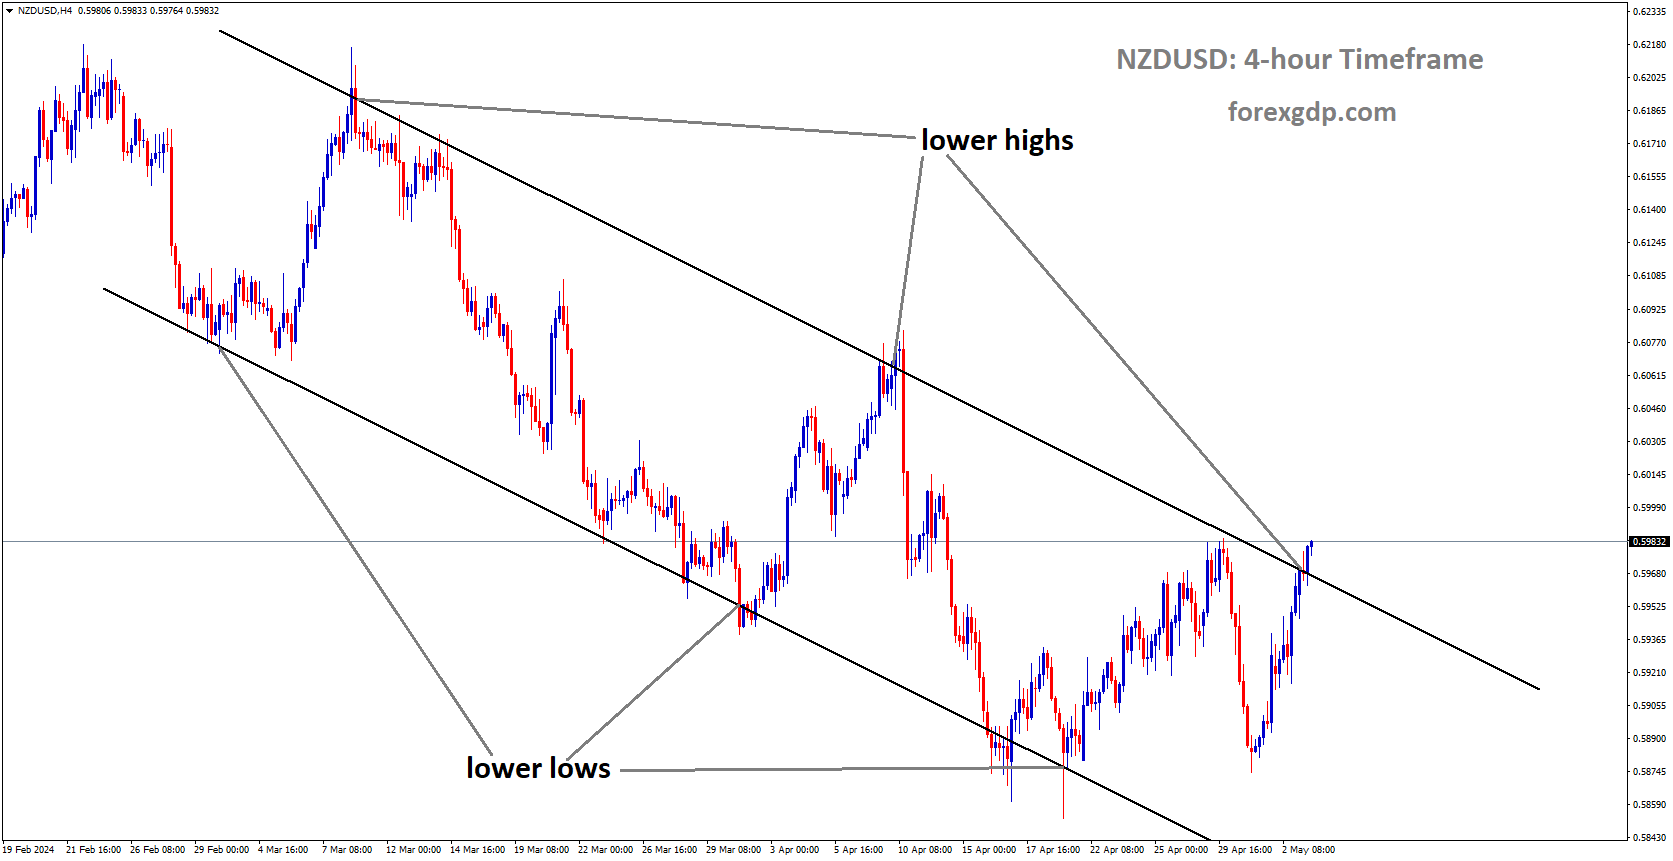 NZDUSD is moving in Descending channel and market has reached lower high area of the channel